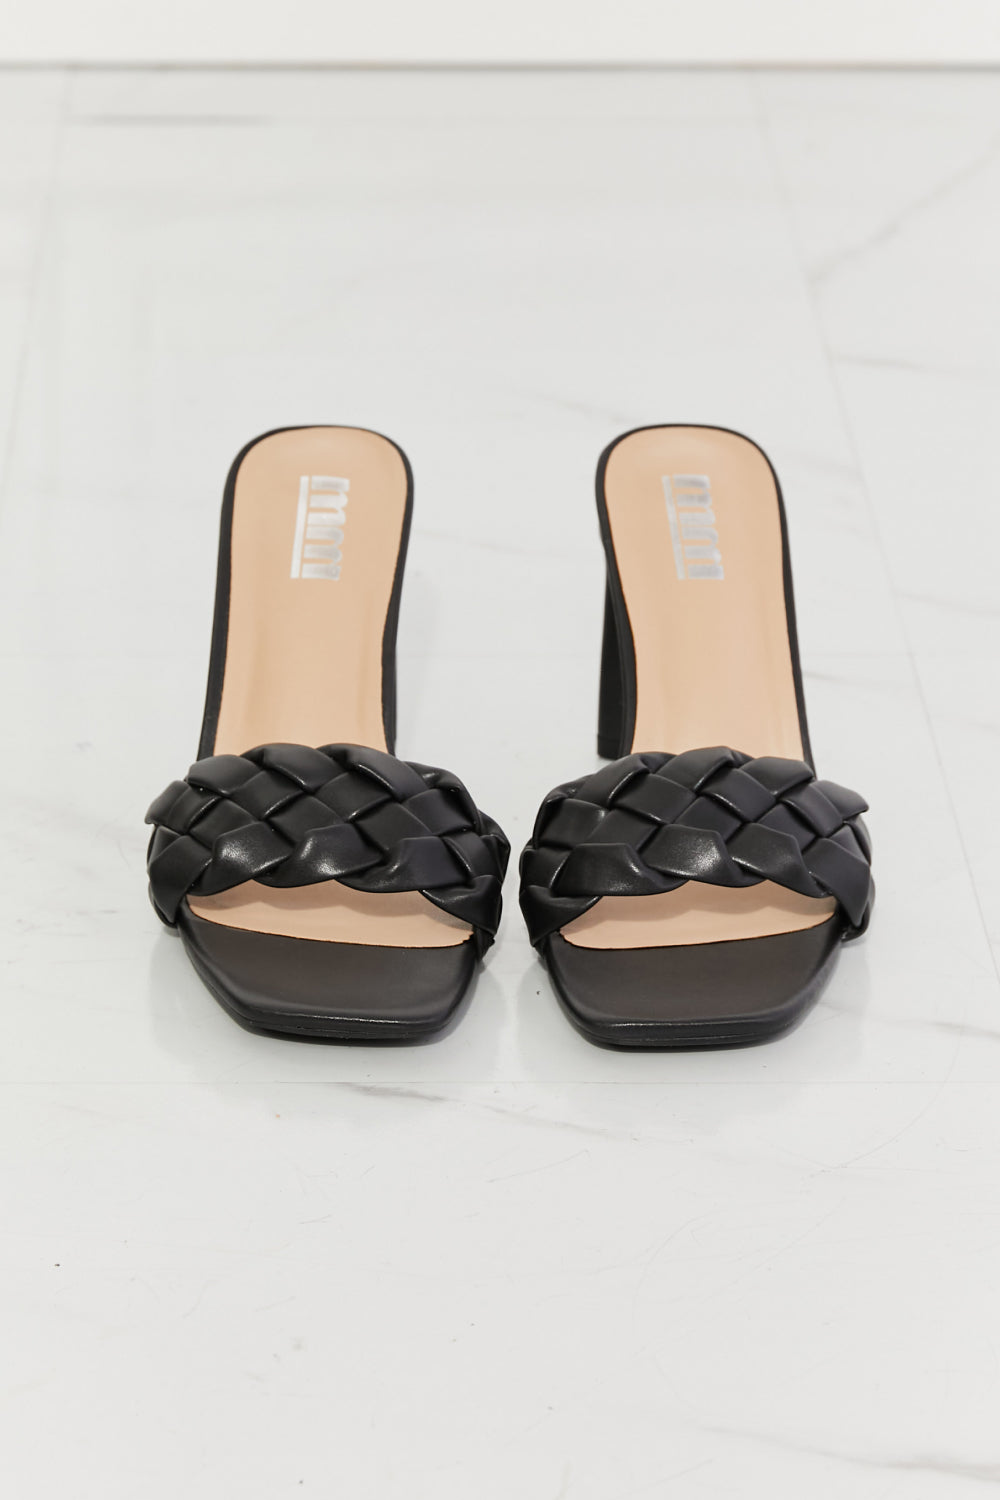 MMShoes Top of the World Braided Block Heel Sandals in Black - The Fashion Unicorn